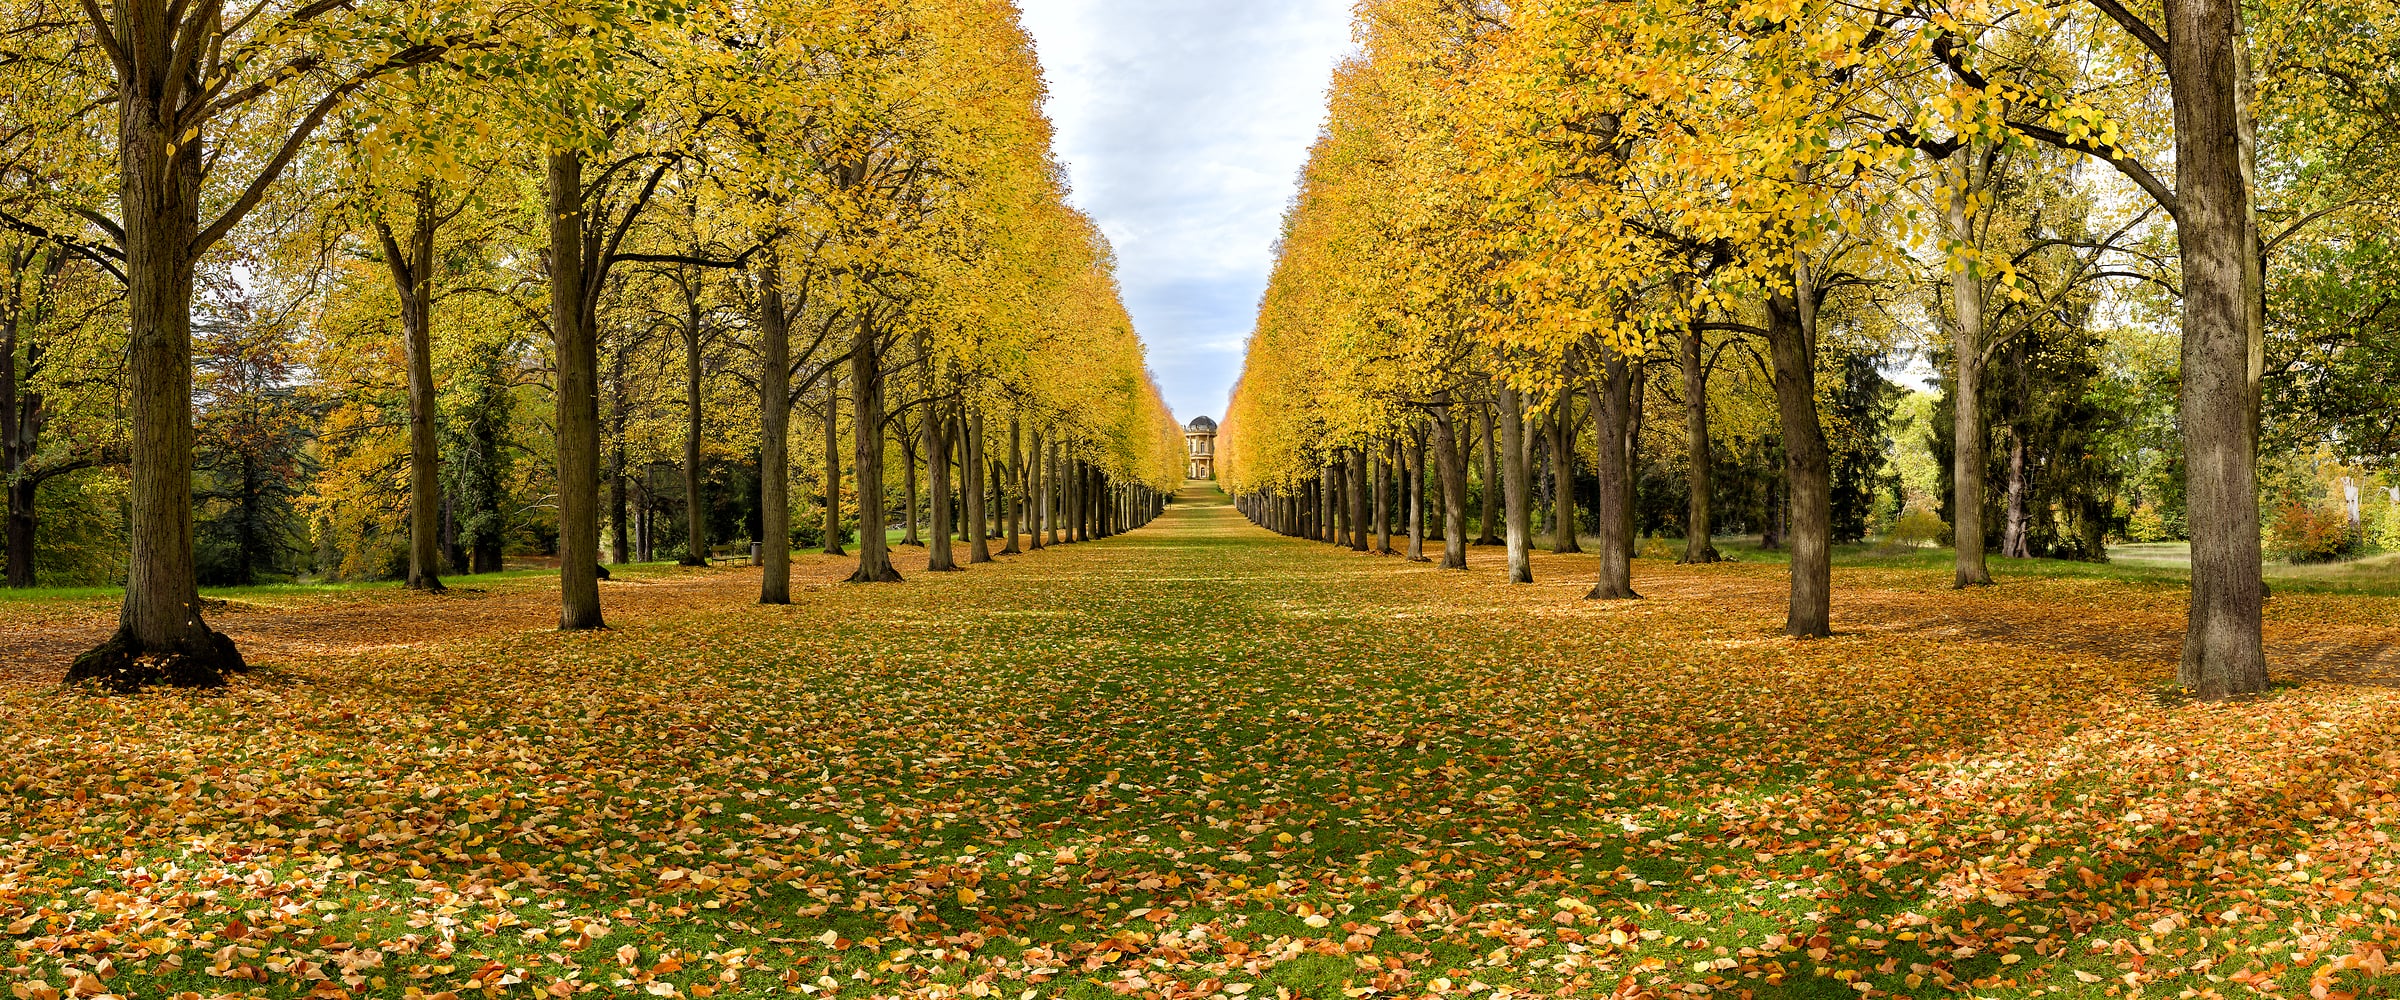 398 megapixels! A very high resolution, large-format VAST photo print of autumn trees lining a grassy strip; wall mural photograph created by Scott Dimond in Schlosspark Sanssouci, Potsdam, Germany.